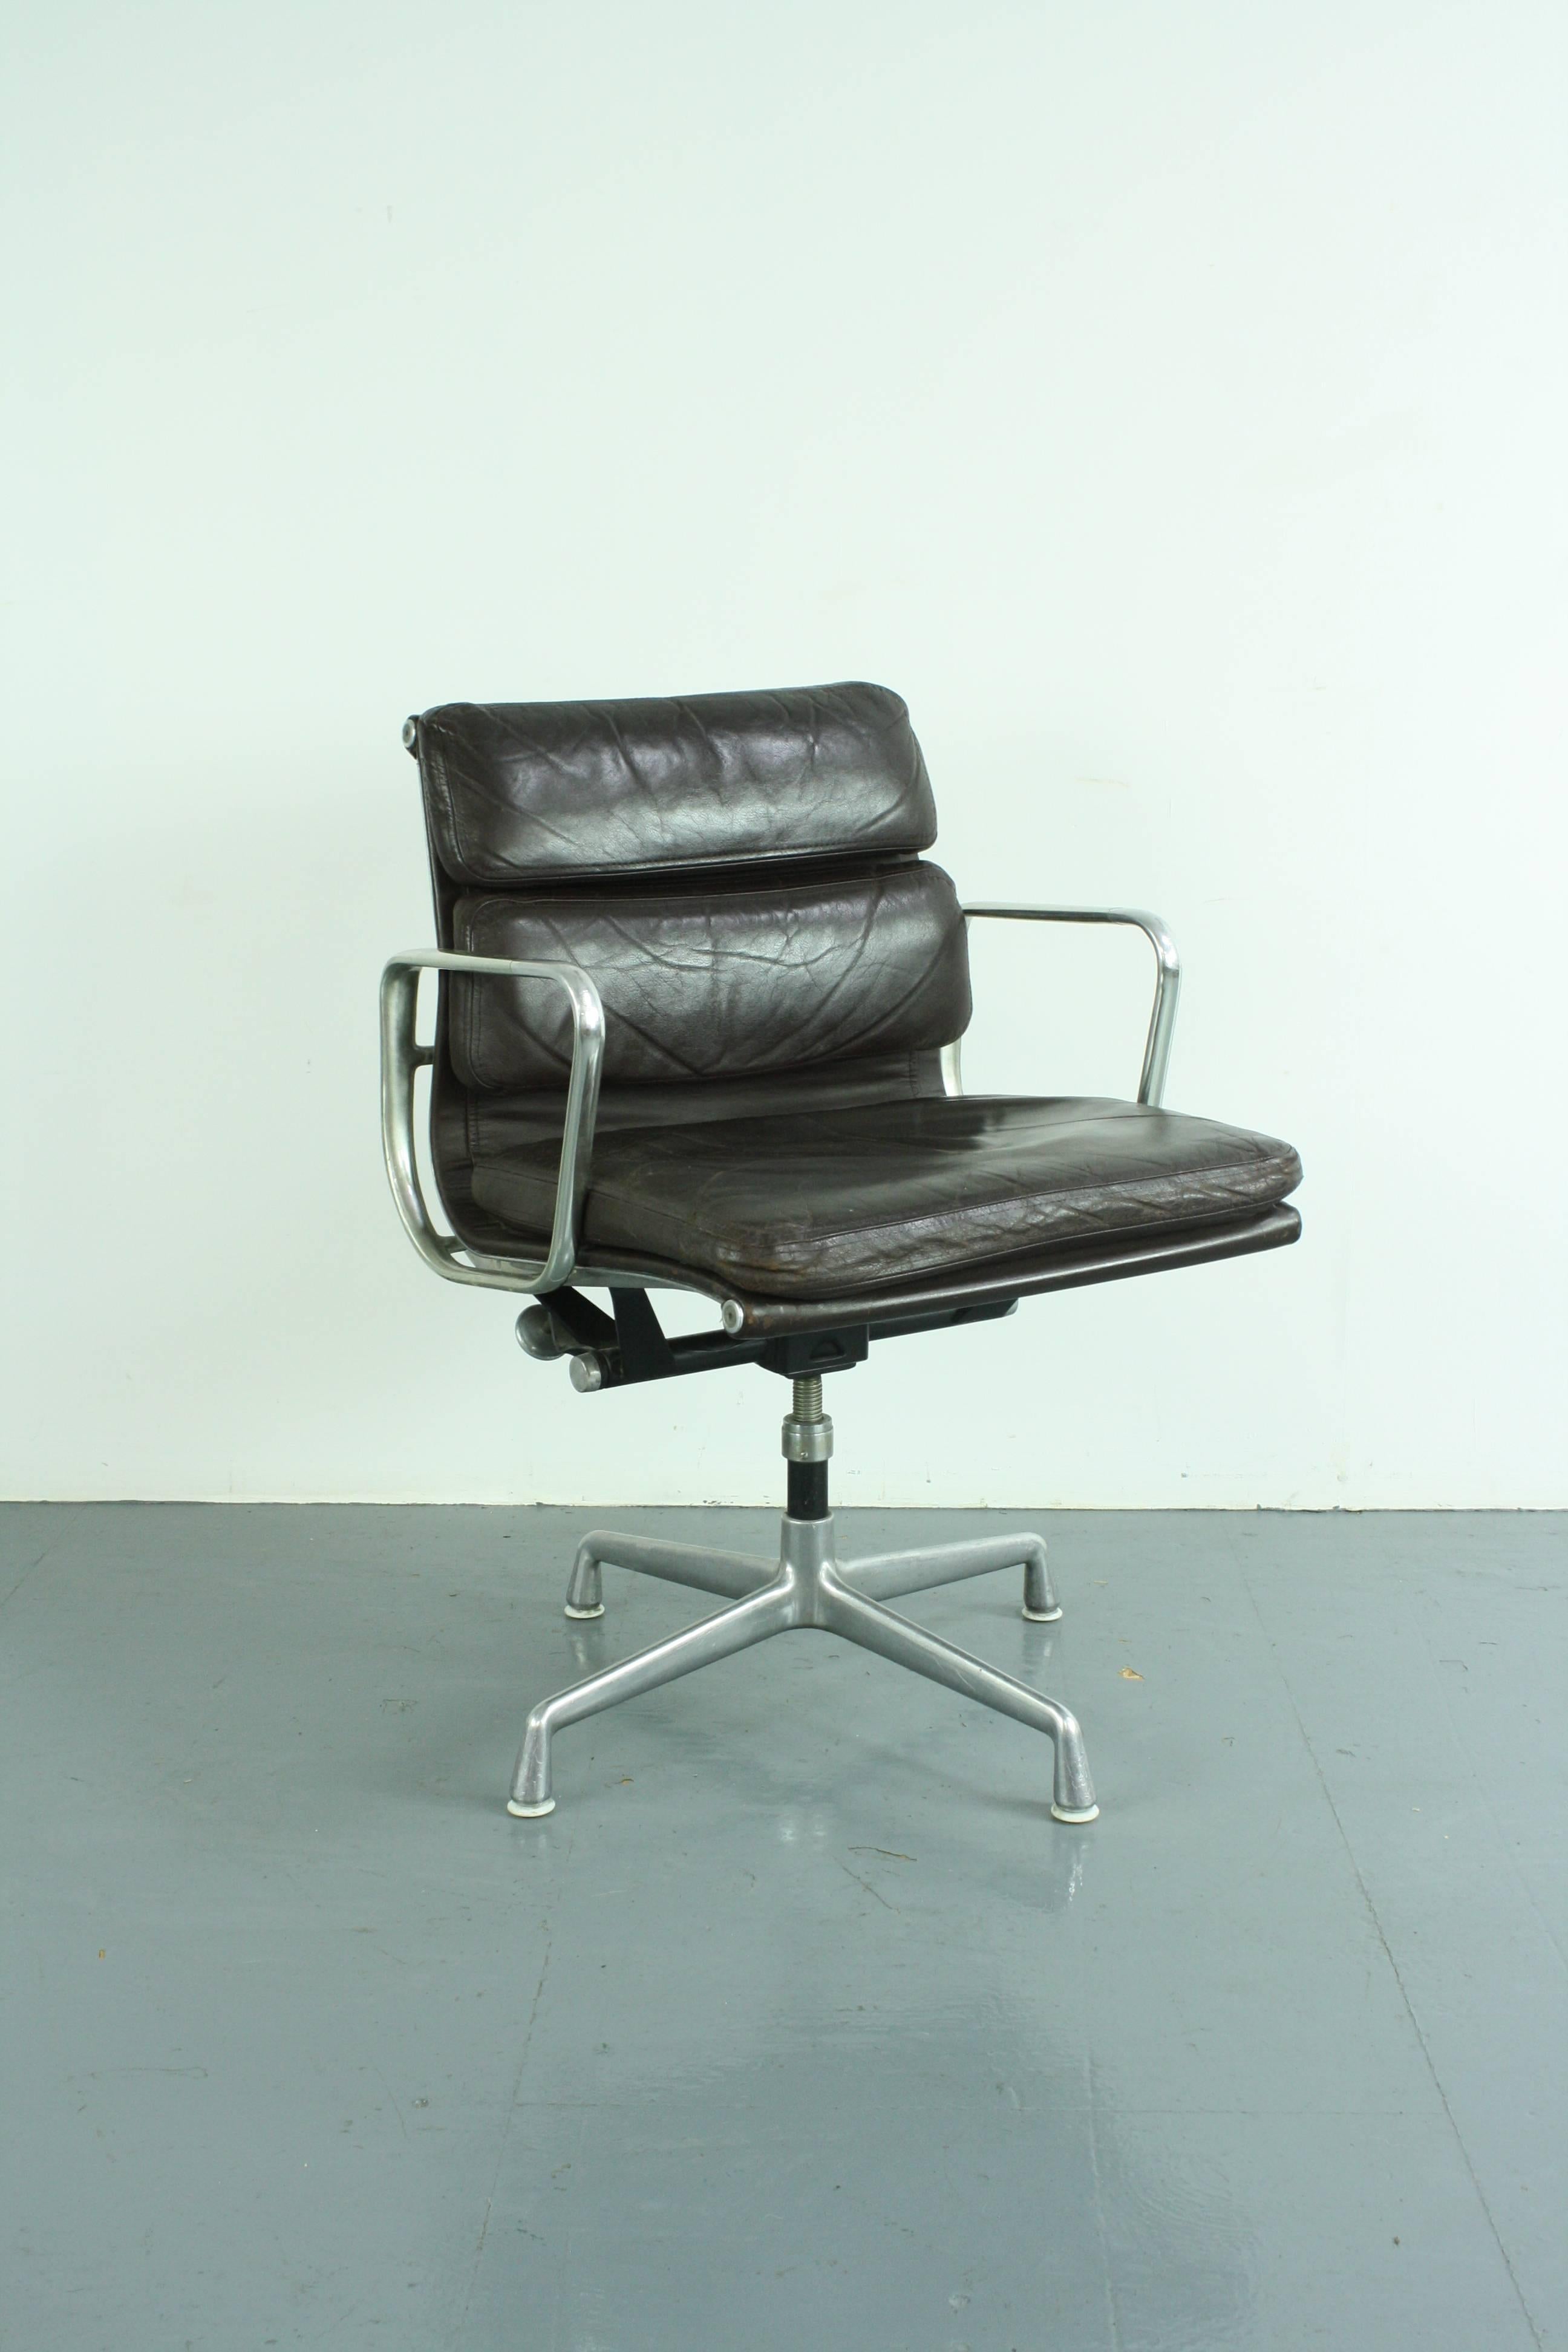 Beautiful vintage dark brown leather soft pad aluminium group chair designed by Charles and Ray Eames for Herman Miller in the 1960s.
In very good vintage condition. There is some age-related wear to the leather but nothing serious or specific to